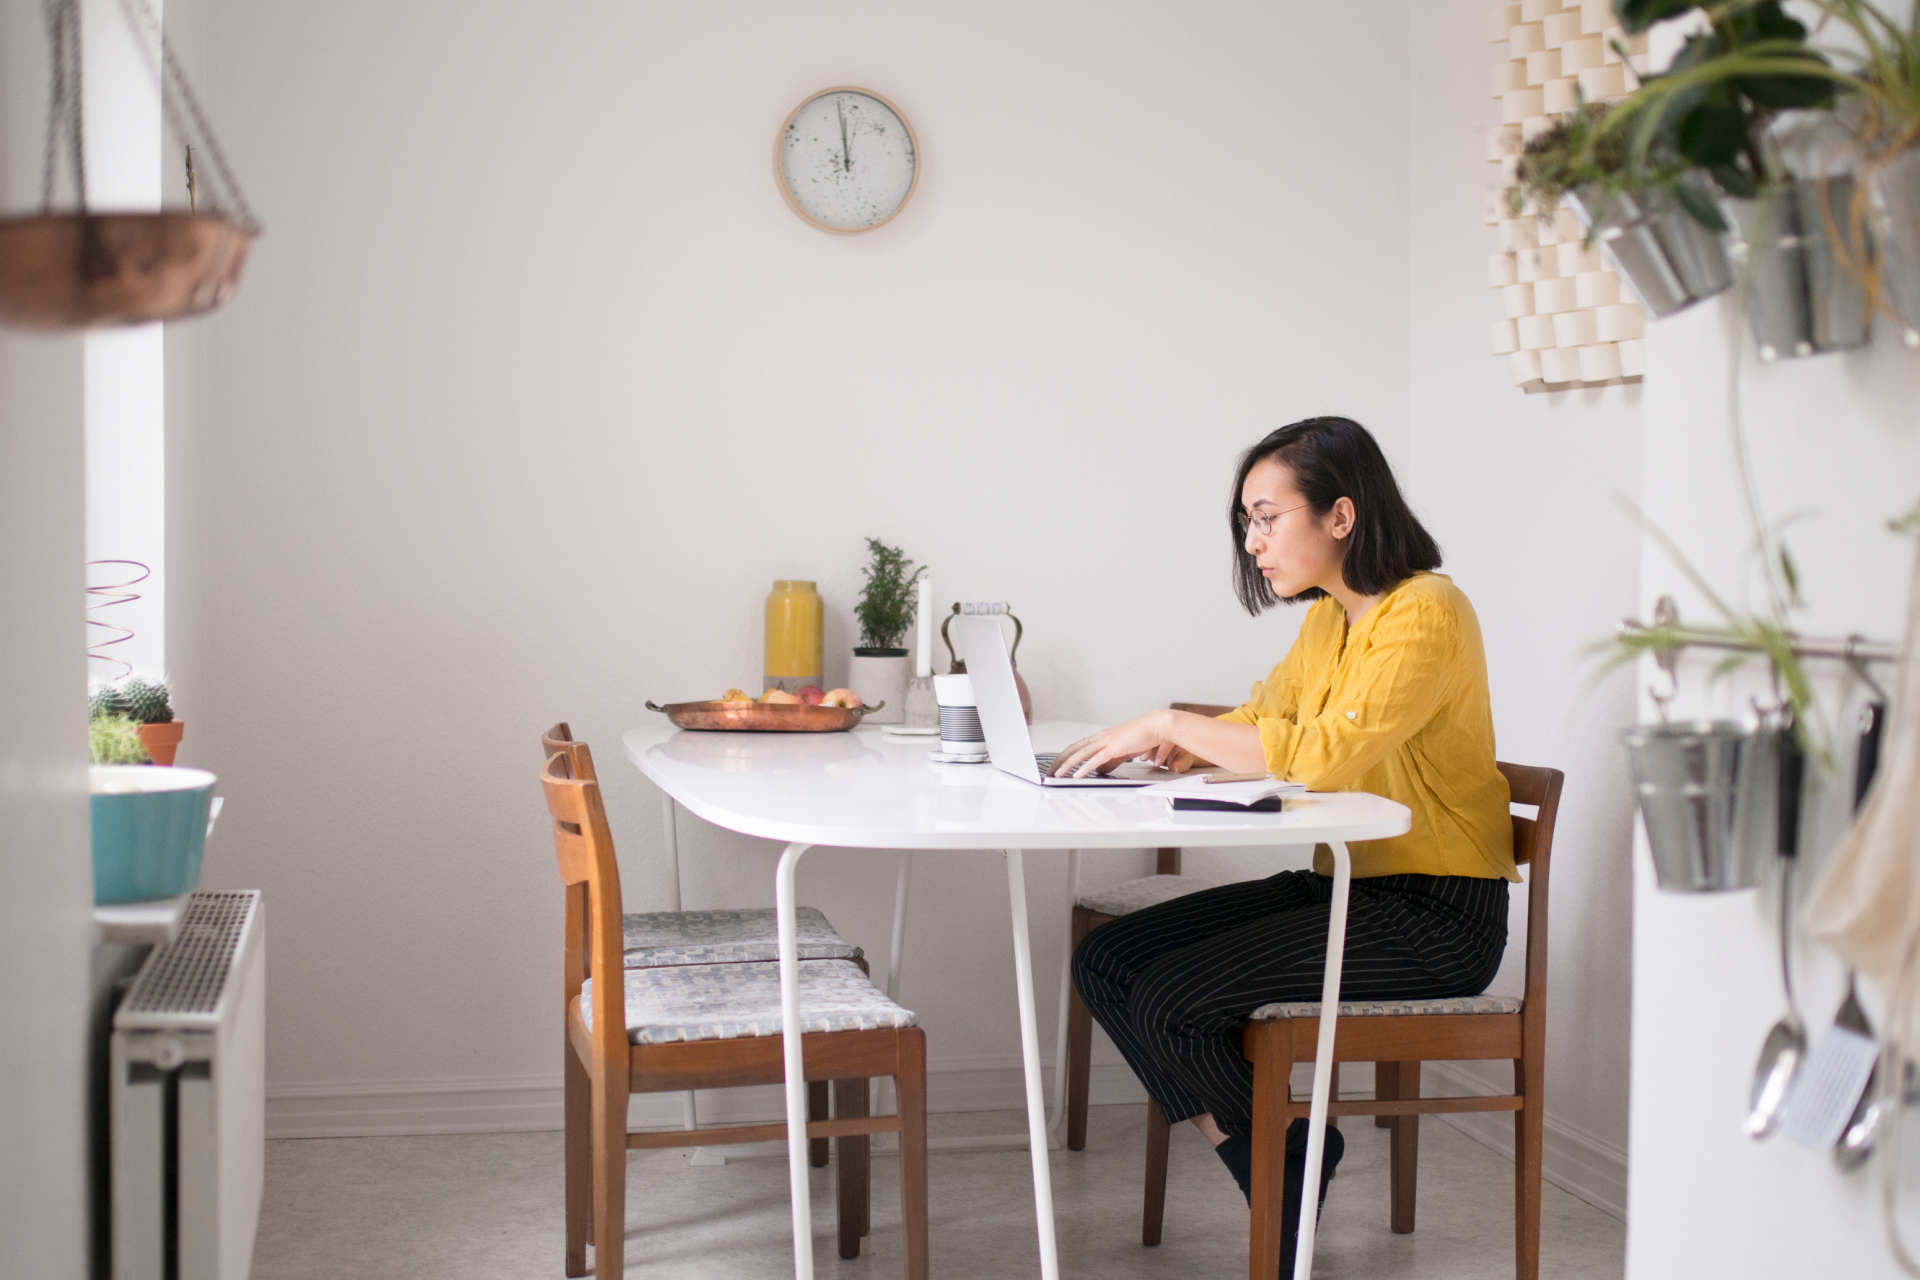 A stay-at-home employee working from their laptop